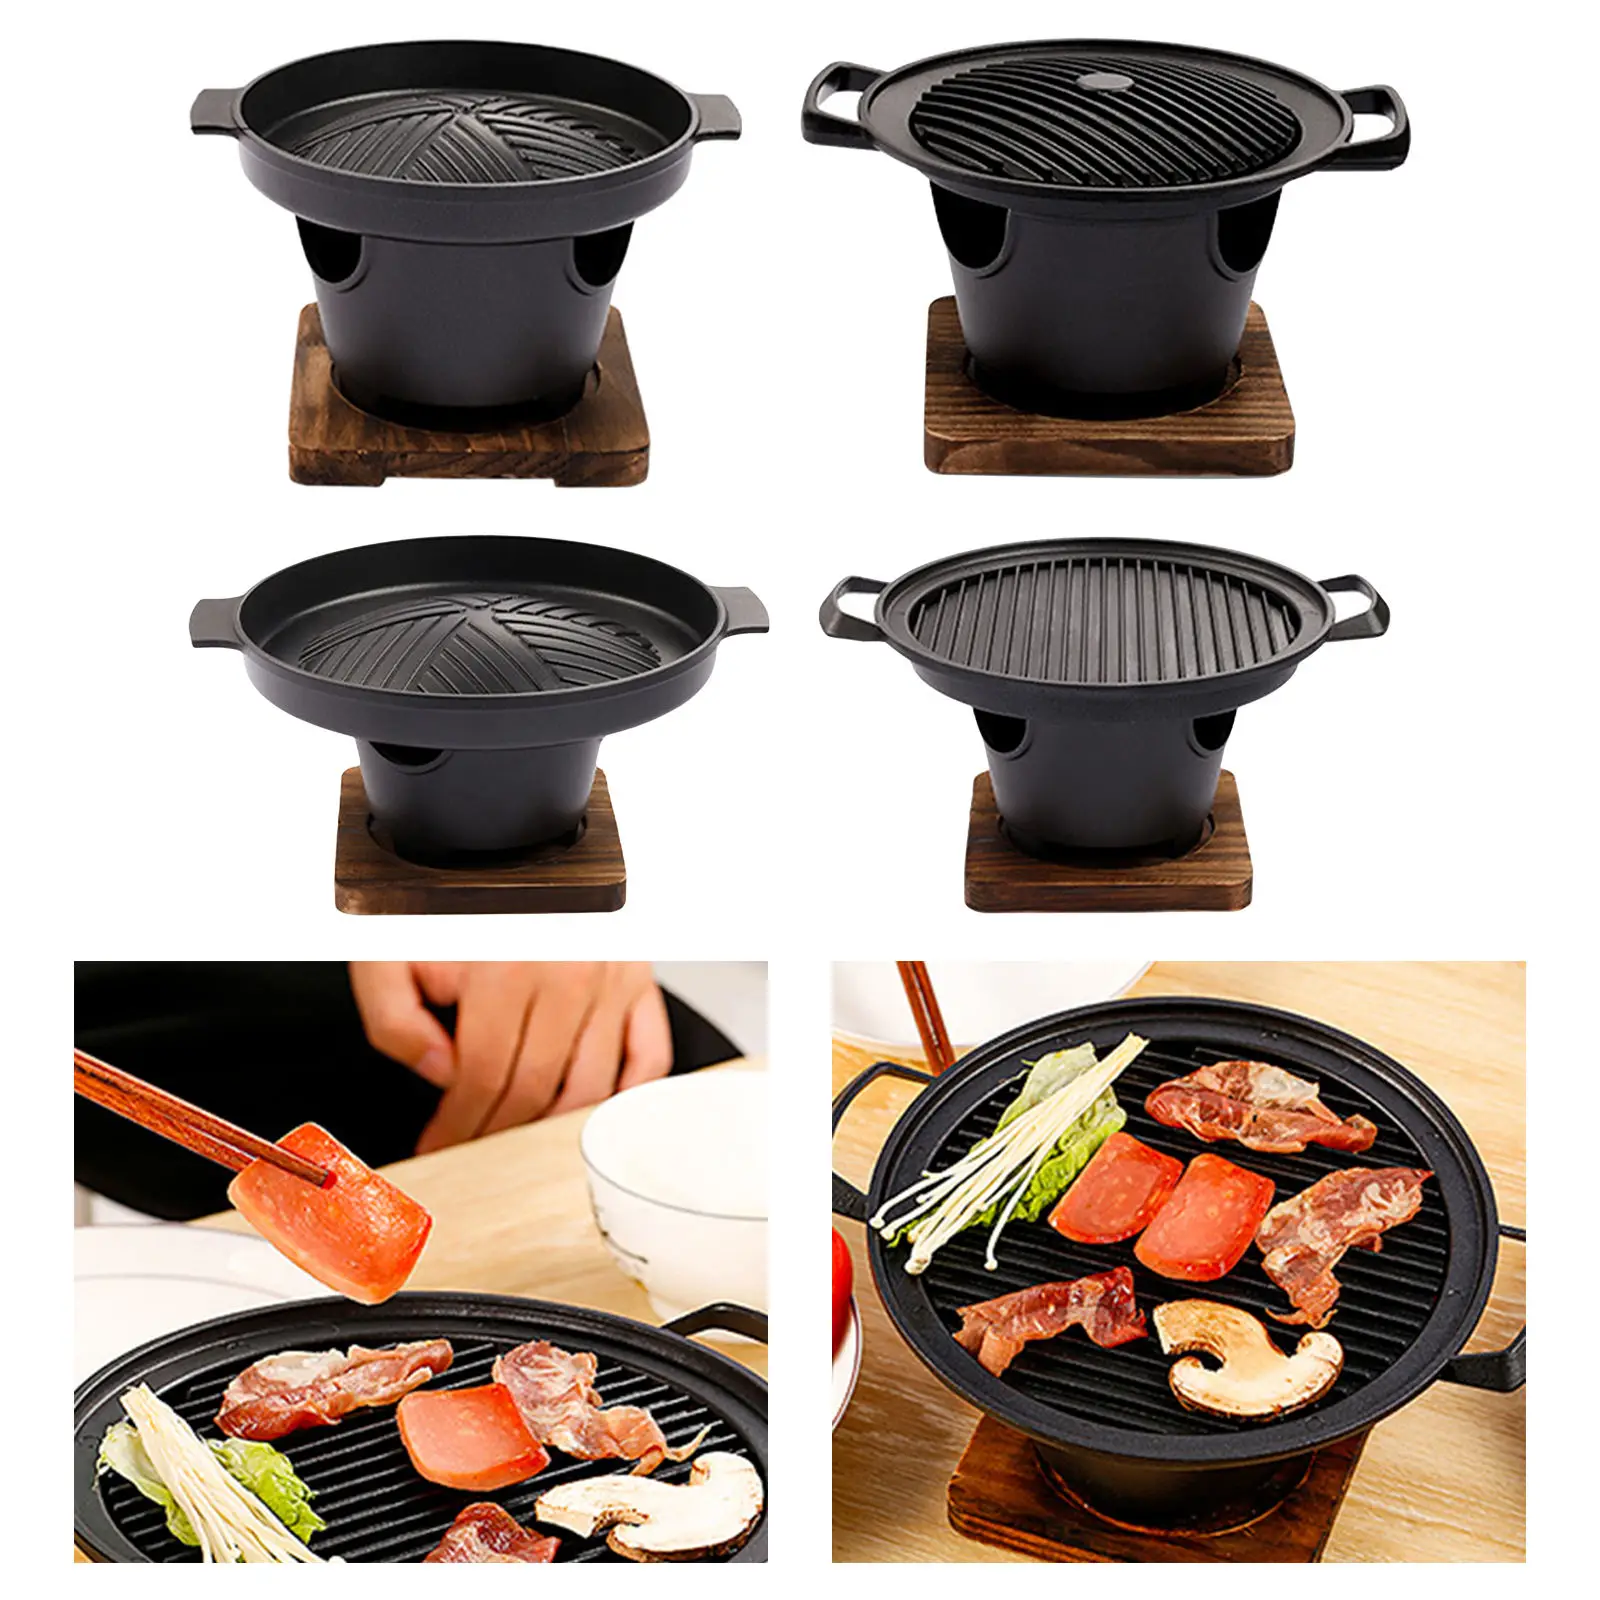 BBQ Grill BBQ Oven Plate Alcohol Stove Lightweight Triangular Furnace Table Grill Charcoal Grill Outdoor Cooker Tools